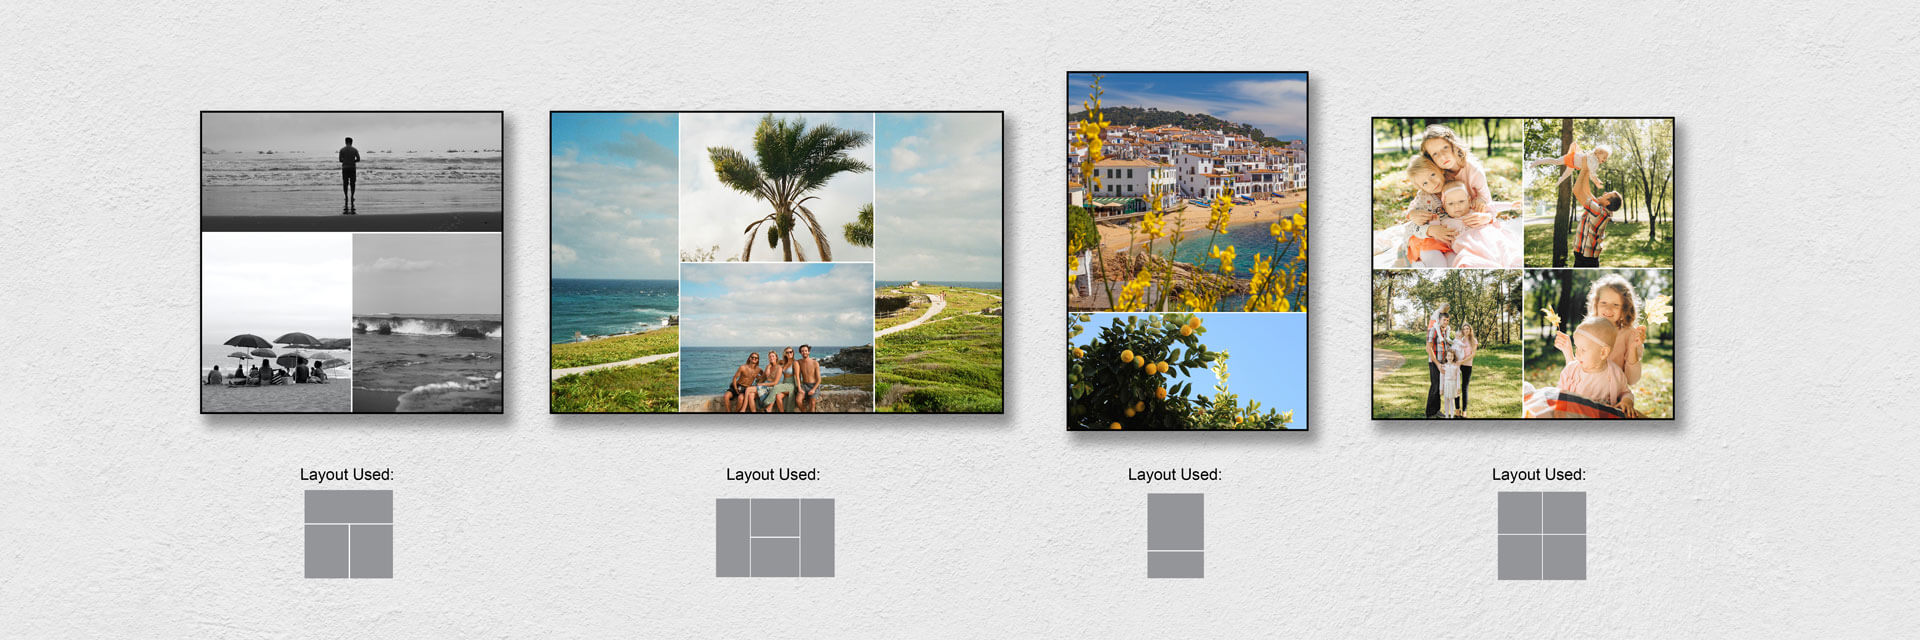 Examples of custom collage maker layouts and inspiration for what photos might look like when printed in different layouts.